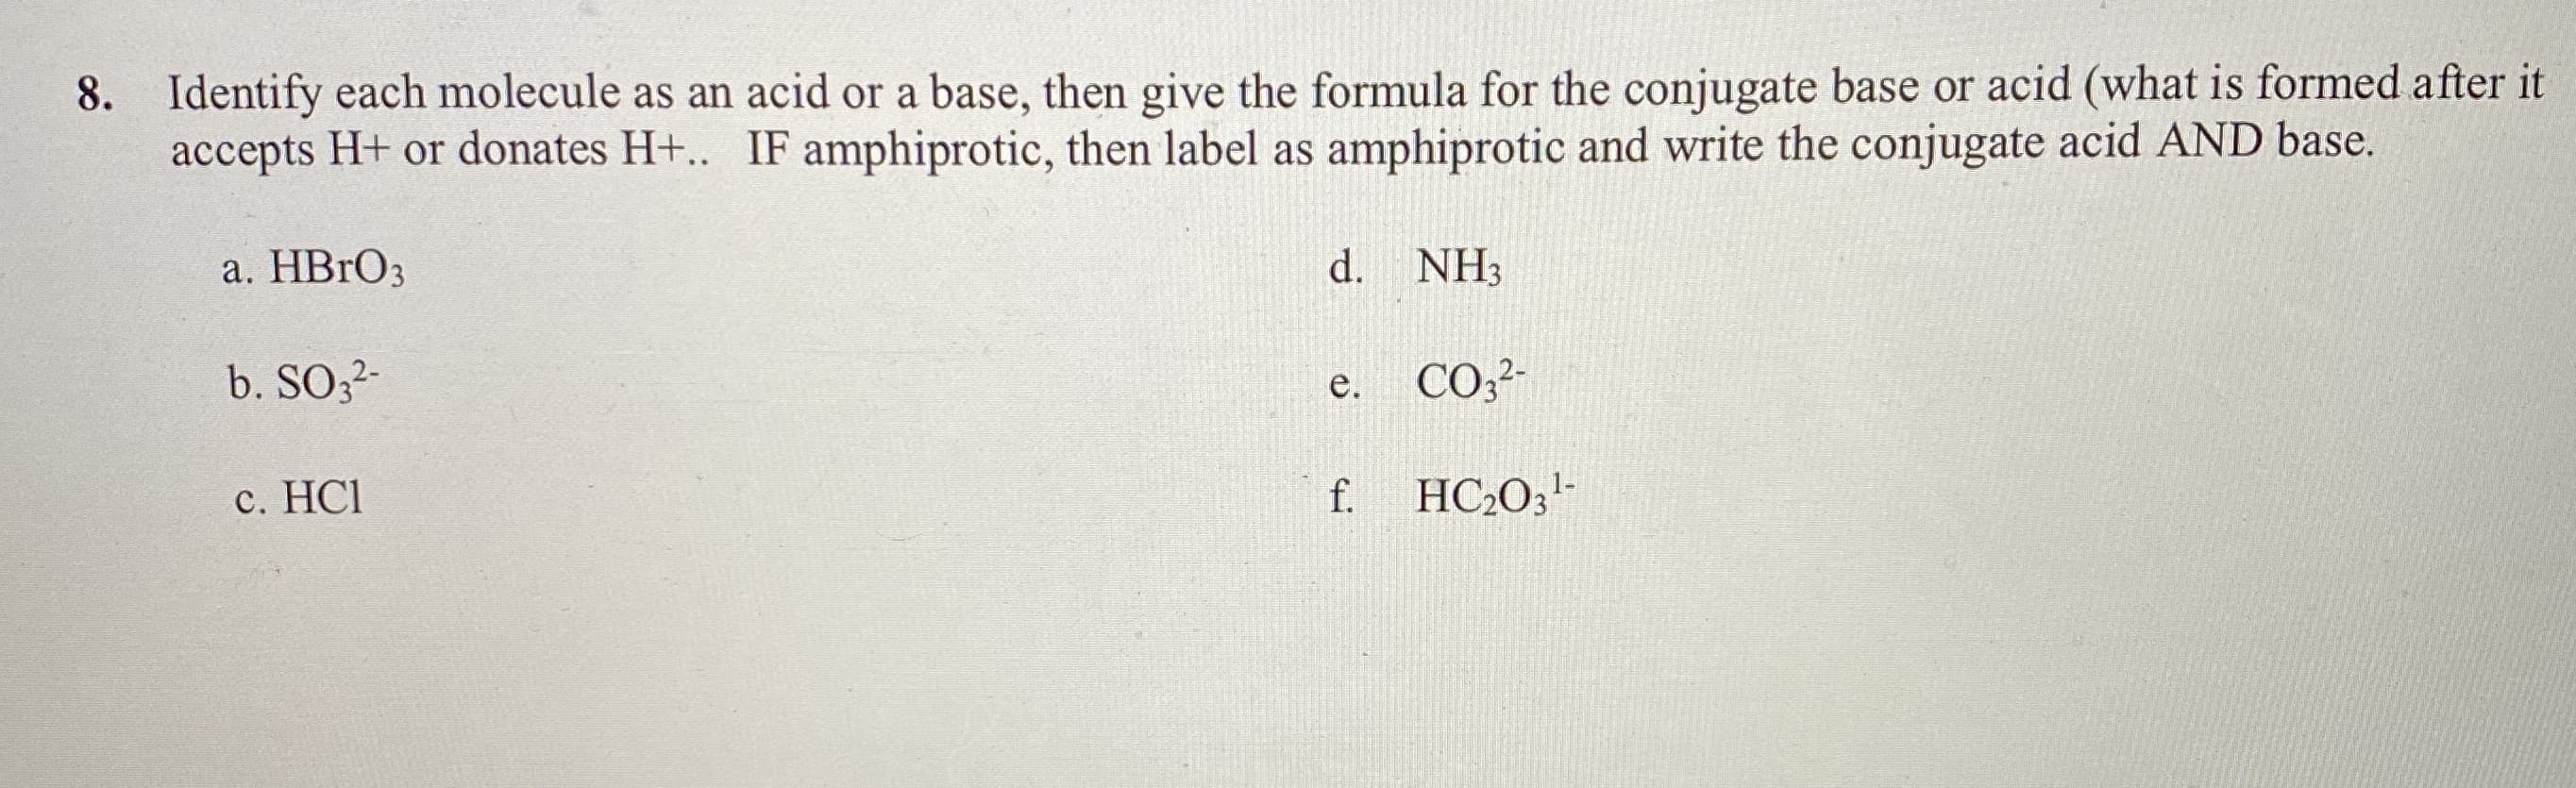 8. Identify each molecule as an acid or a base, then give the formula for the conjugate base or acid (what is formed after it
accepts H+ or donates H+.. IF amphiprotic, then label as amphiprotic and write the conjugate acid AND base.
а. НBrОз
d. NH3
b. SO;-
е.
CO;²-
c. HCI
f.
HC2O;'-
